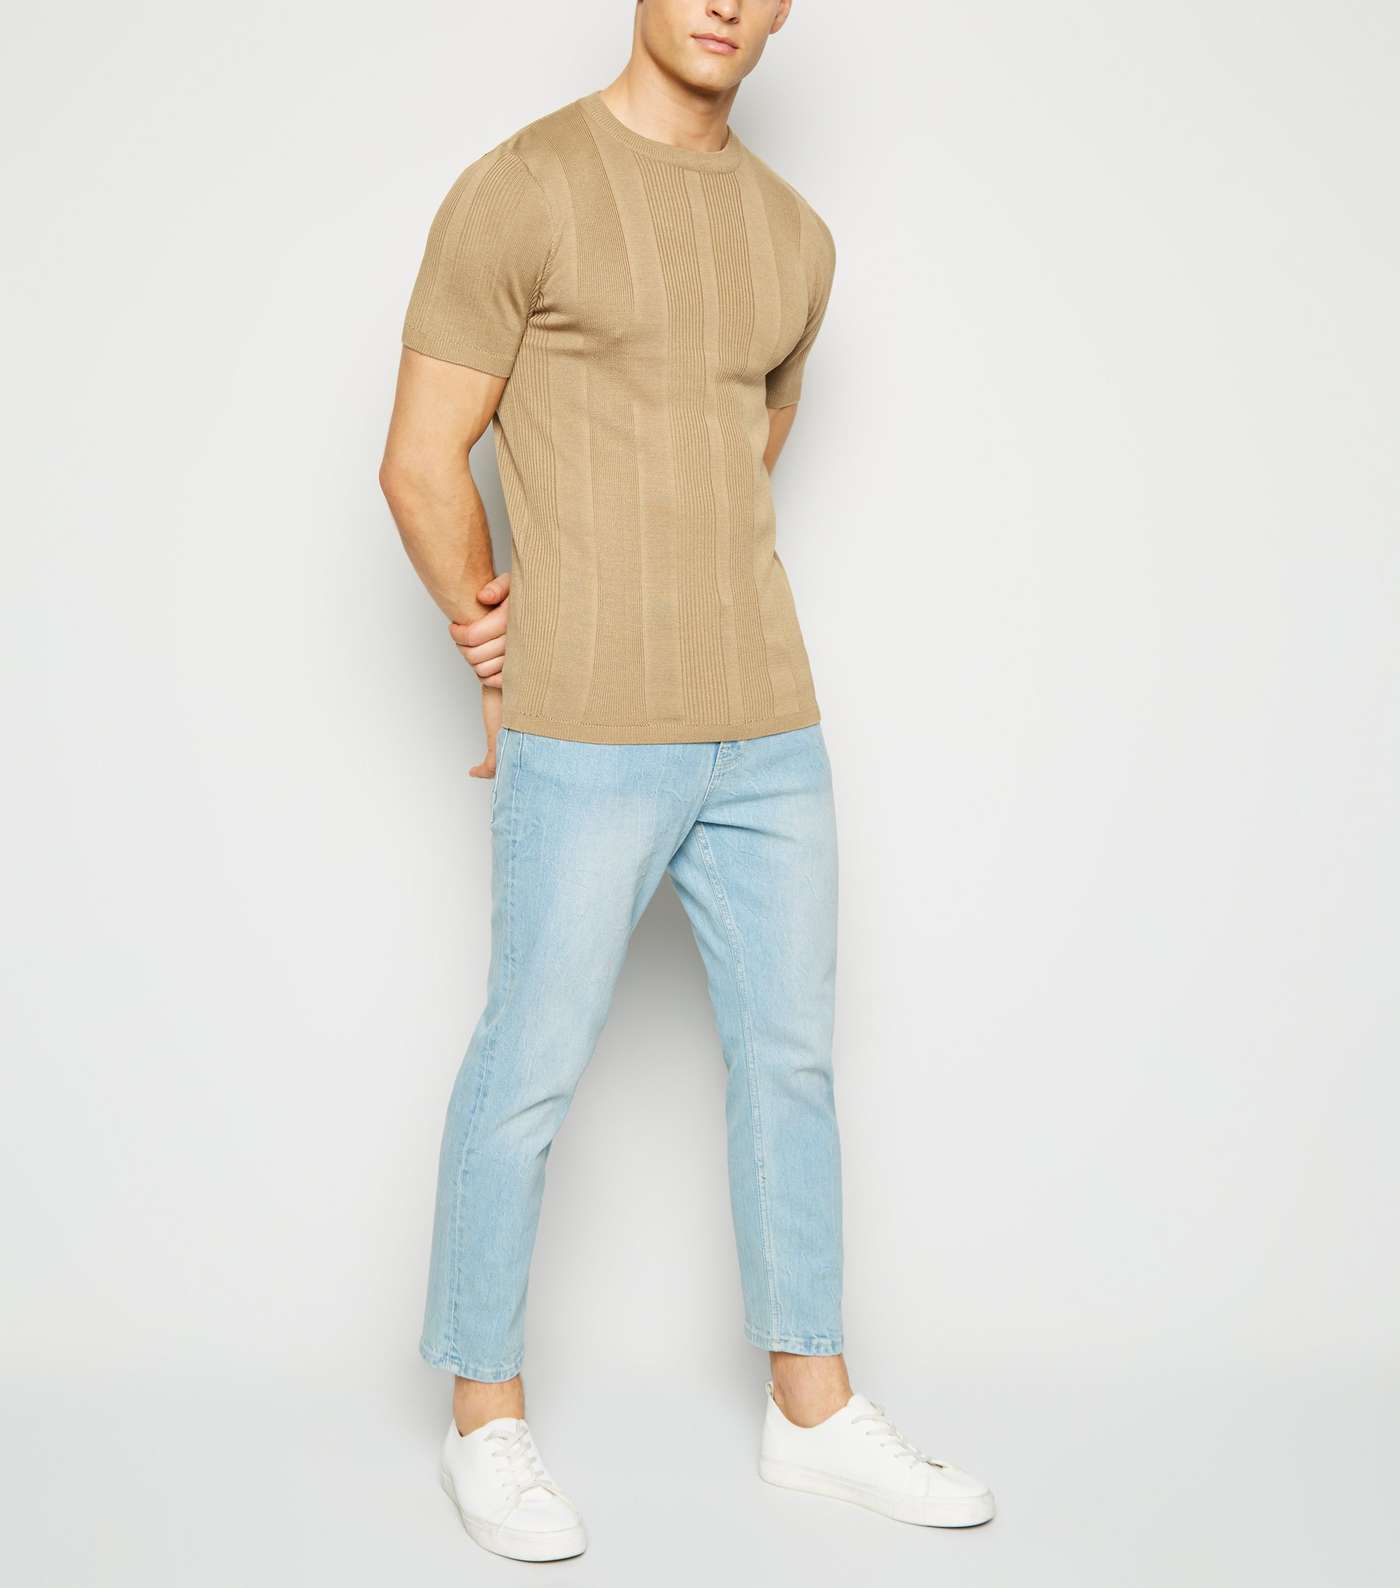 Brown Knit Short Sleeve Muscle Fit T-Shirt Image 2